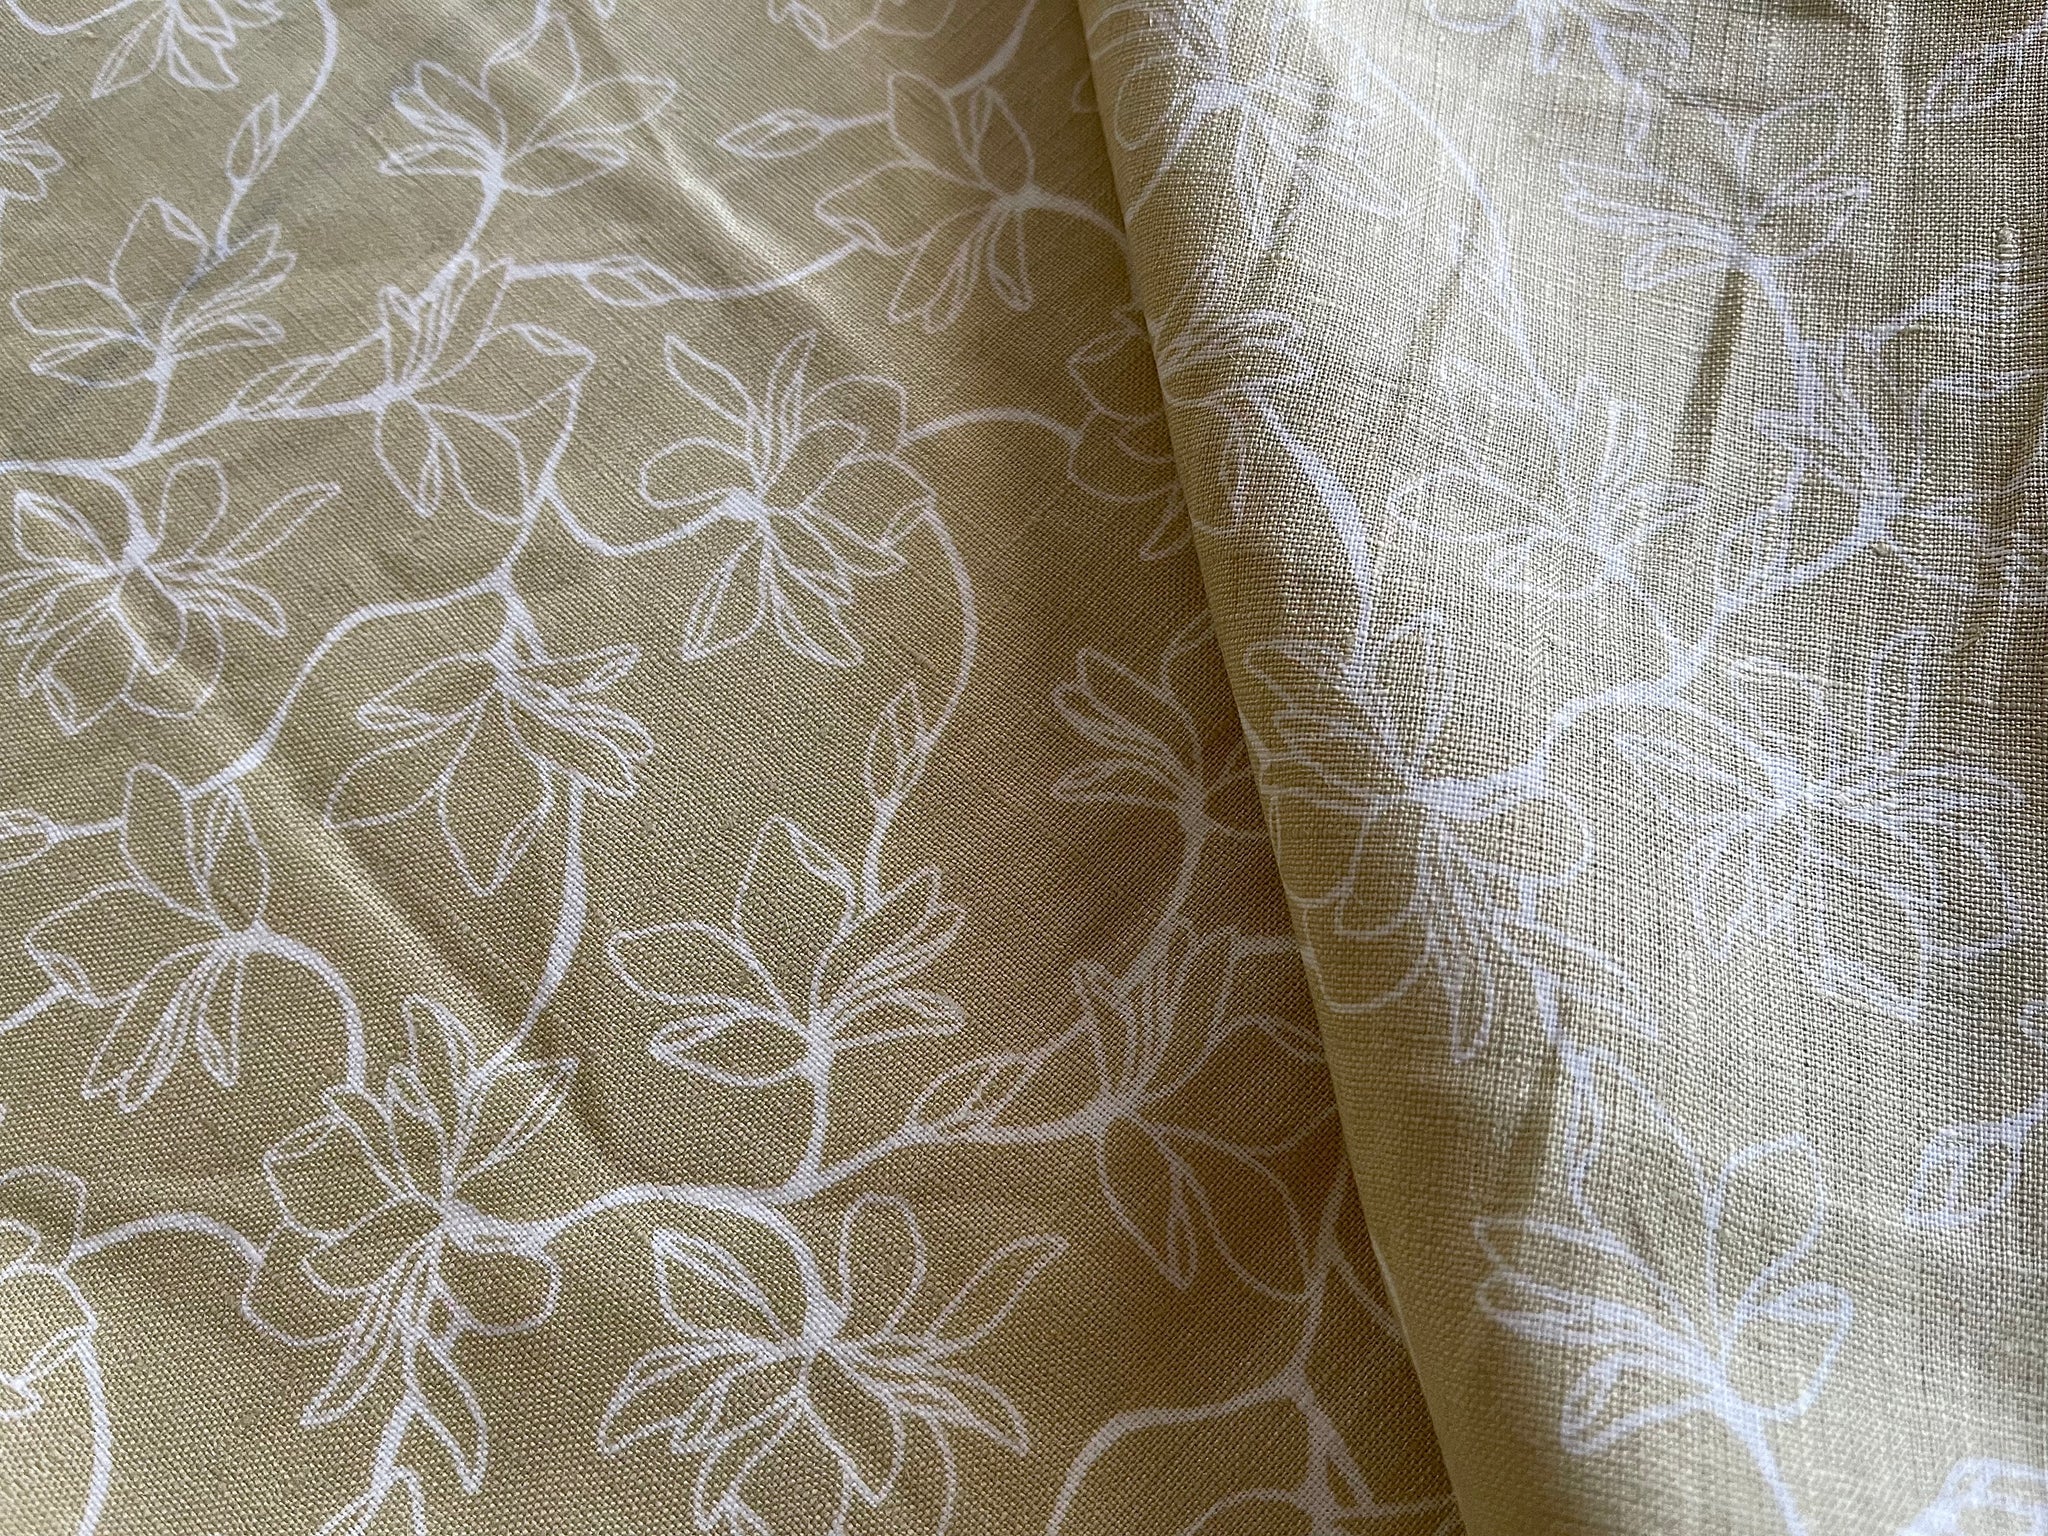 Deadstock Linen Fabric - Lotus Print in Hay Yellow and White